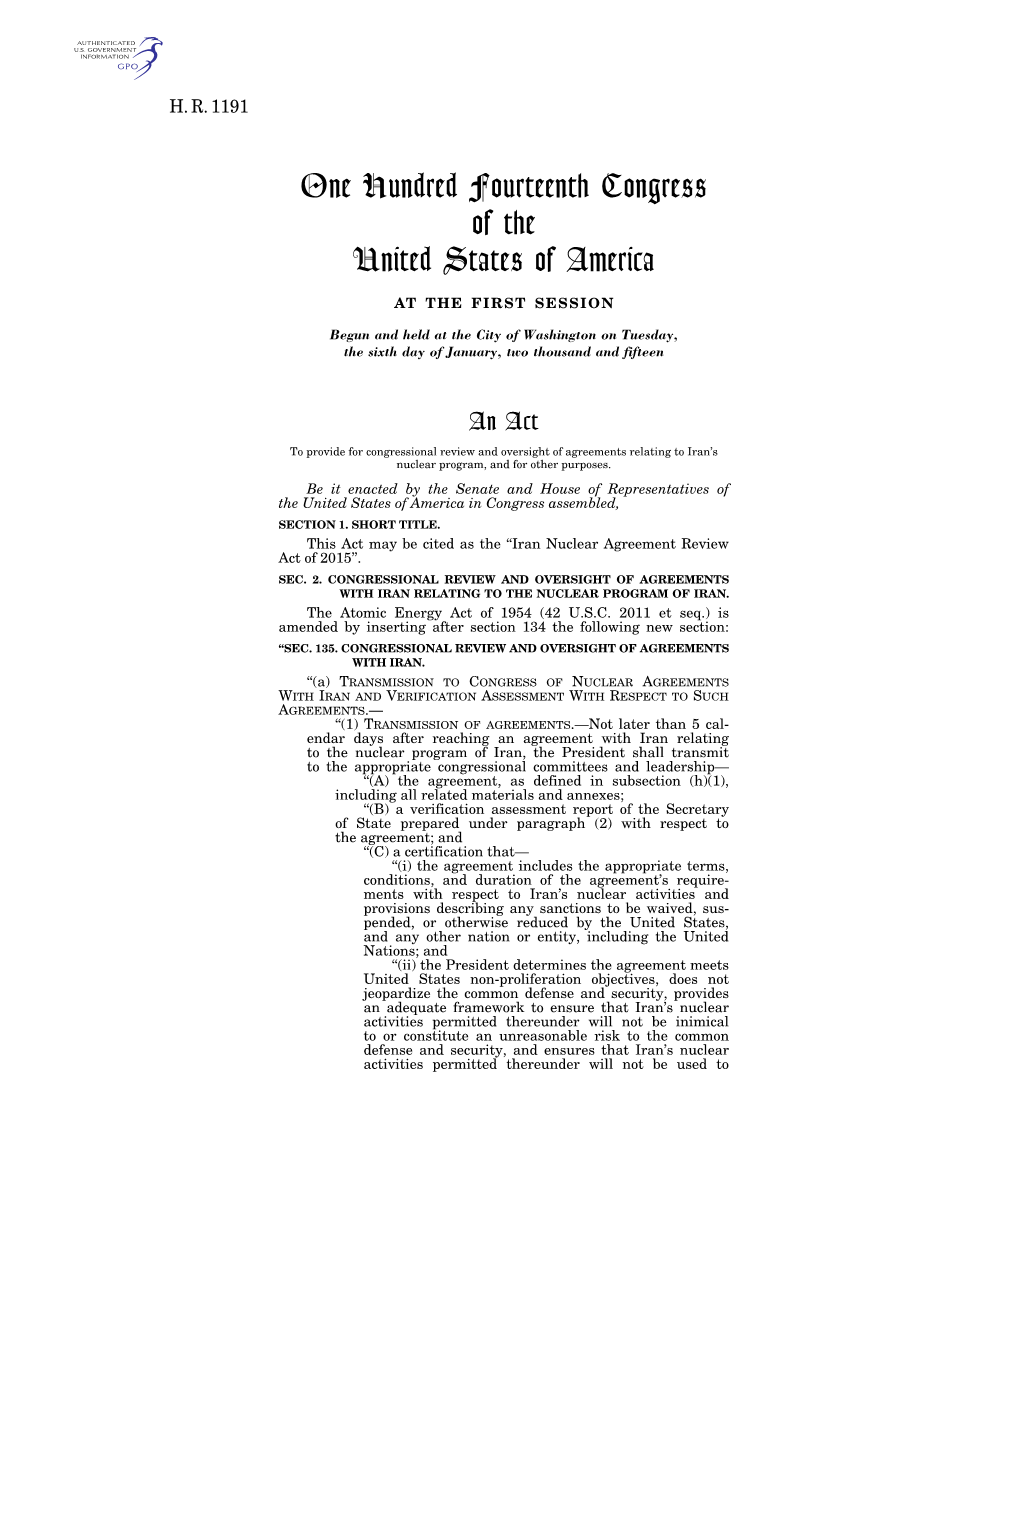 Iran Nuclear Agreement Review Act of 2015’’